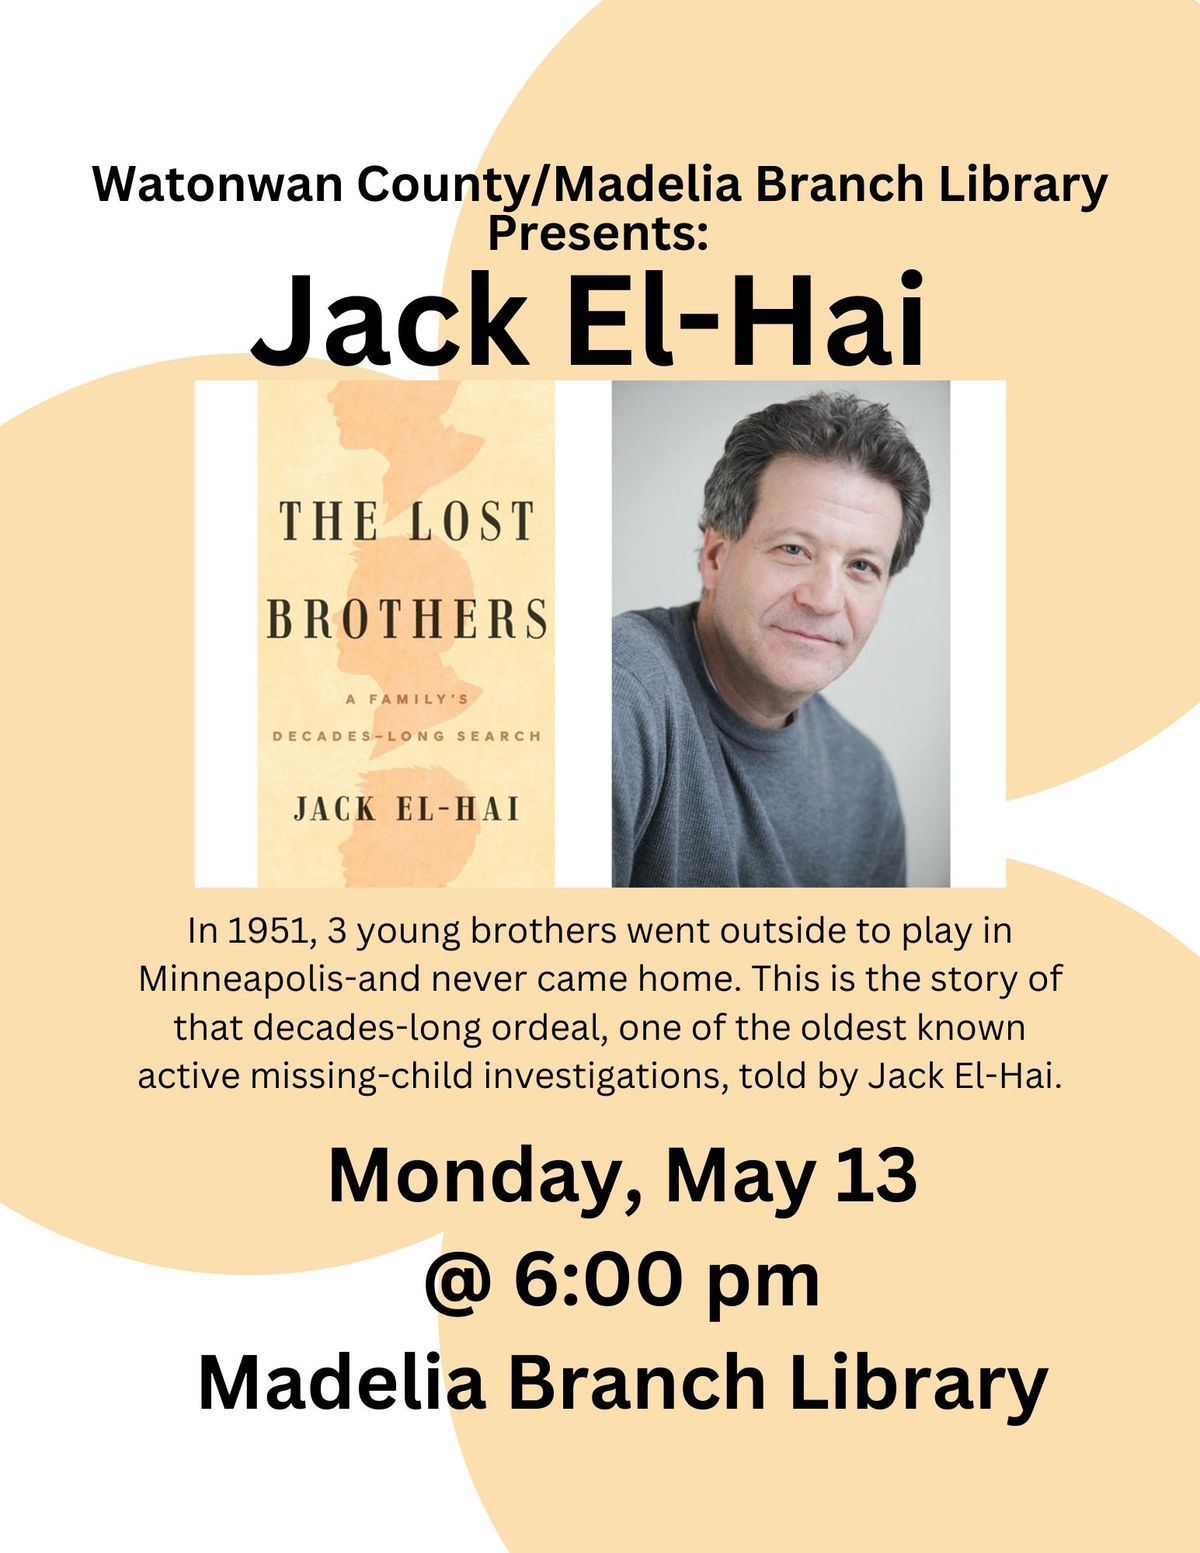 Author of "The Lost Brothers", Jack El-Hai